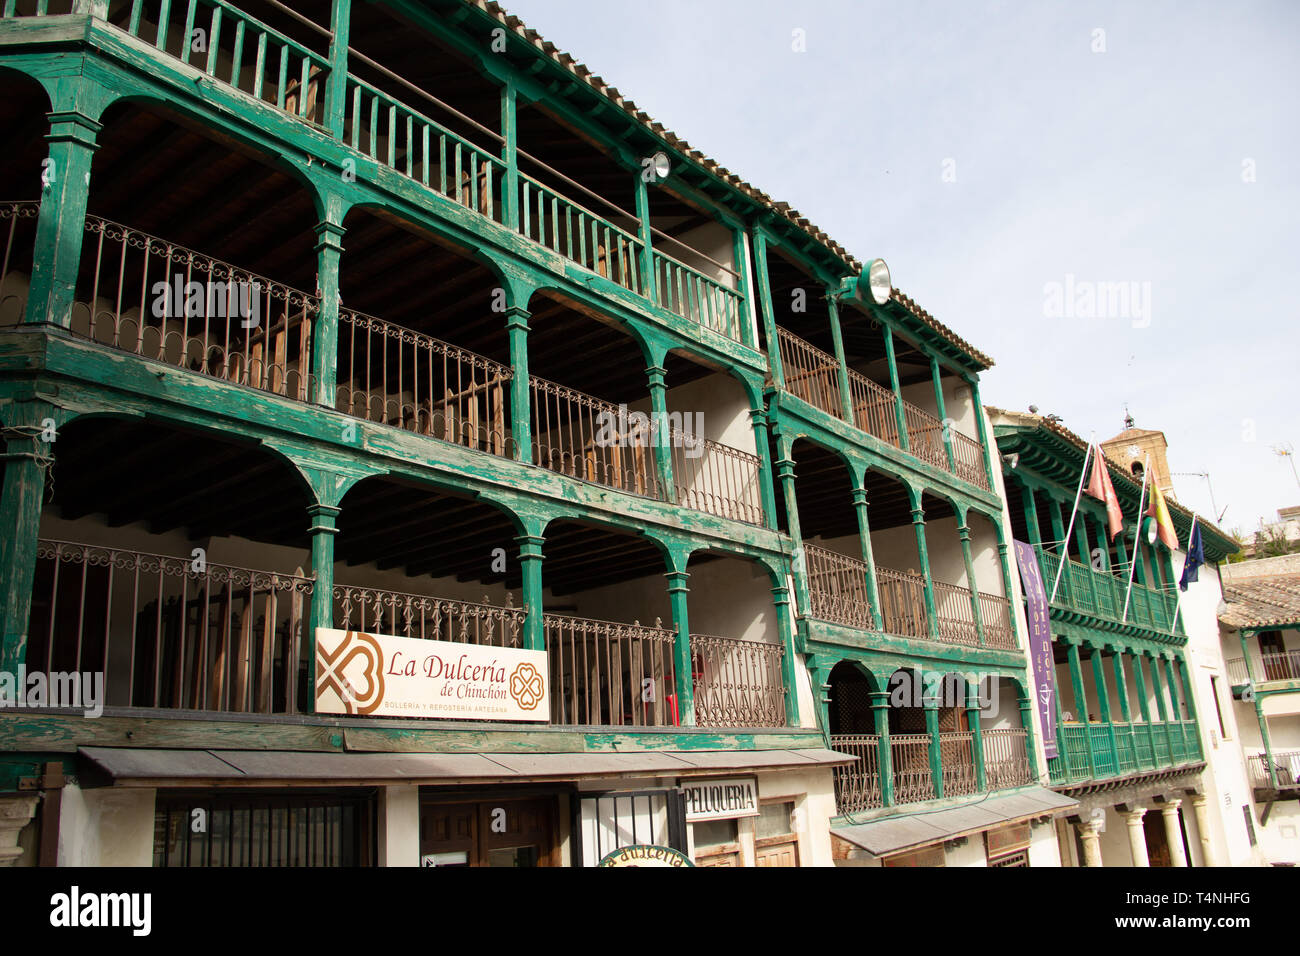 Chinchon, Spain - 04 14 2019: Typical green balconies of the main plaza Stock Photo